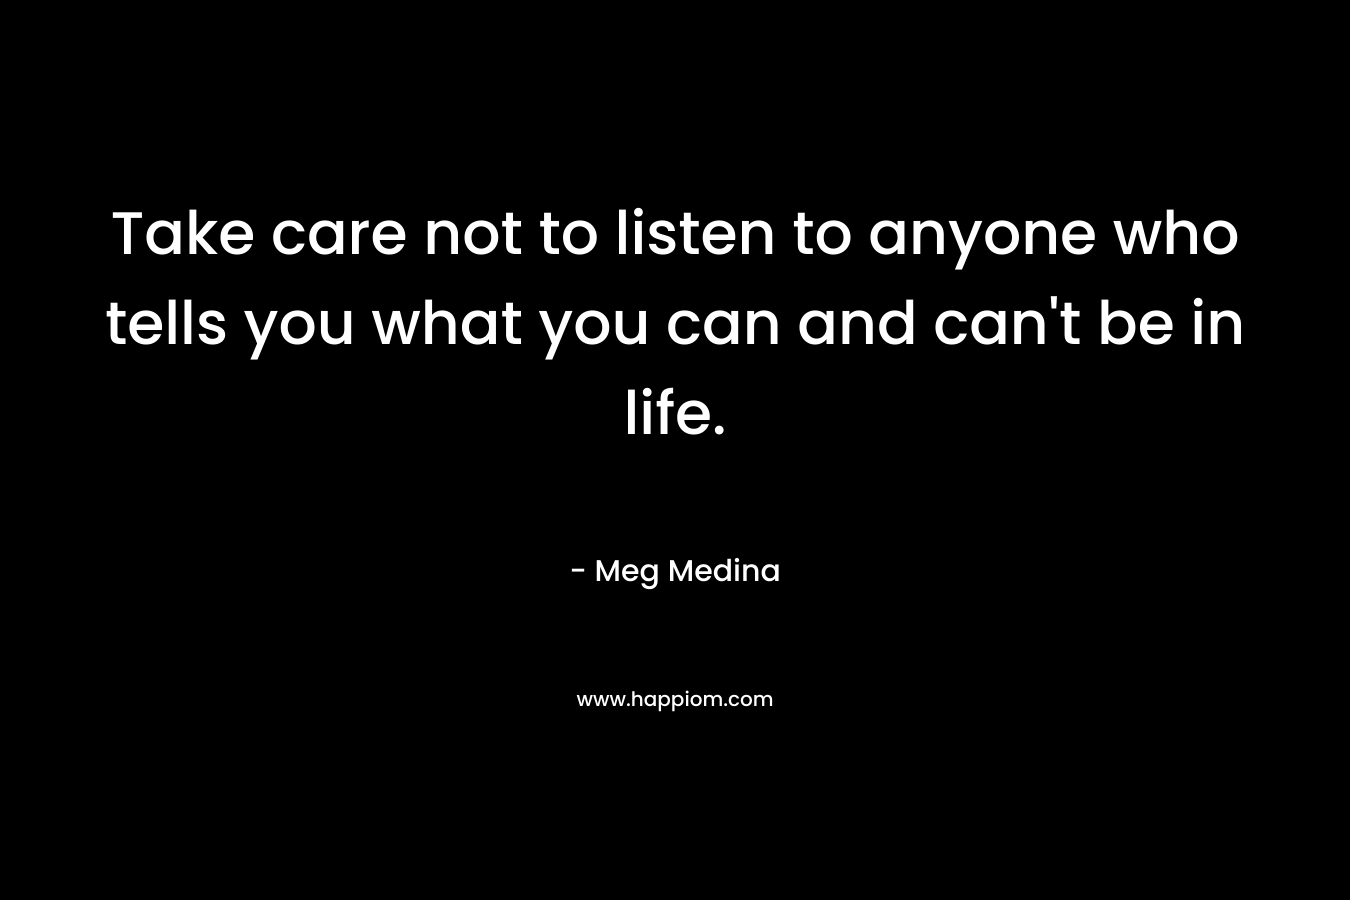 Take care not to listen to anyone who tells you what you can and can't be in life.